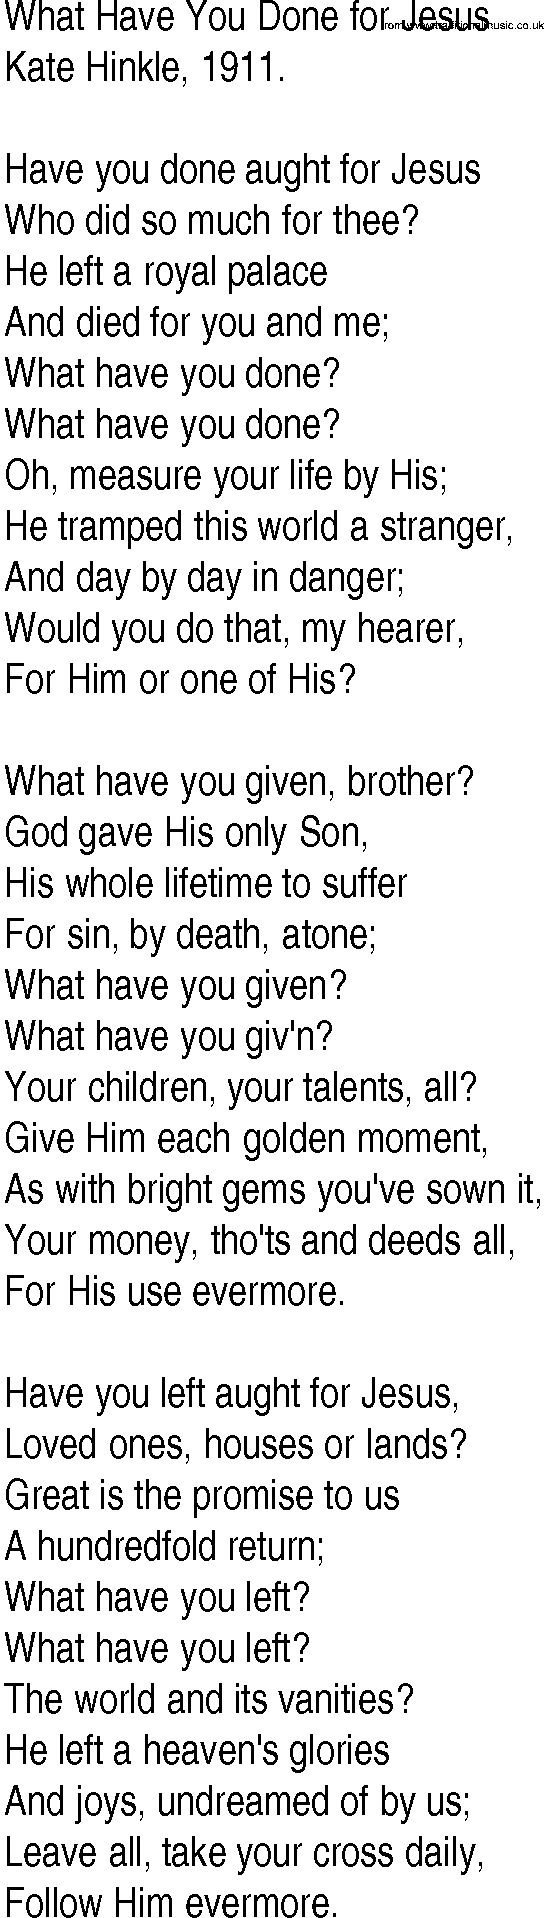 Hymn and Gospel Song: What Have You Done for Jesus by Kate Hinkle lyrics